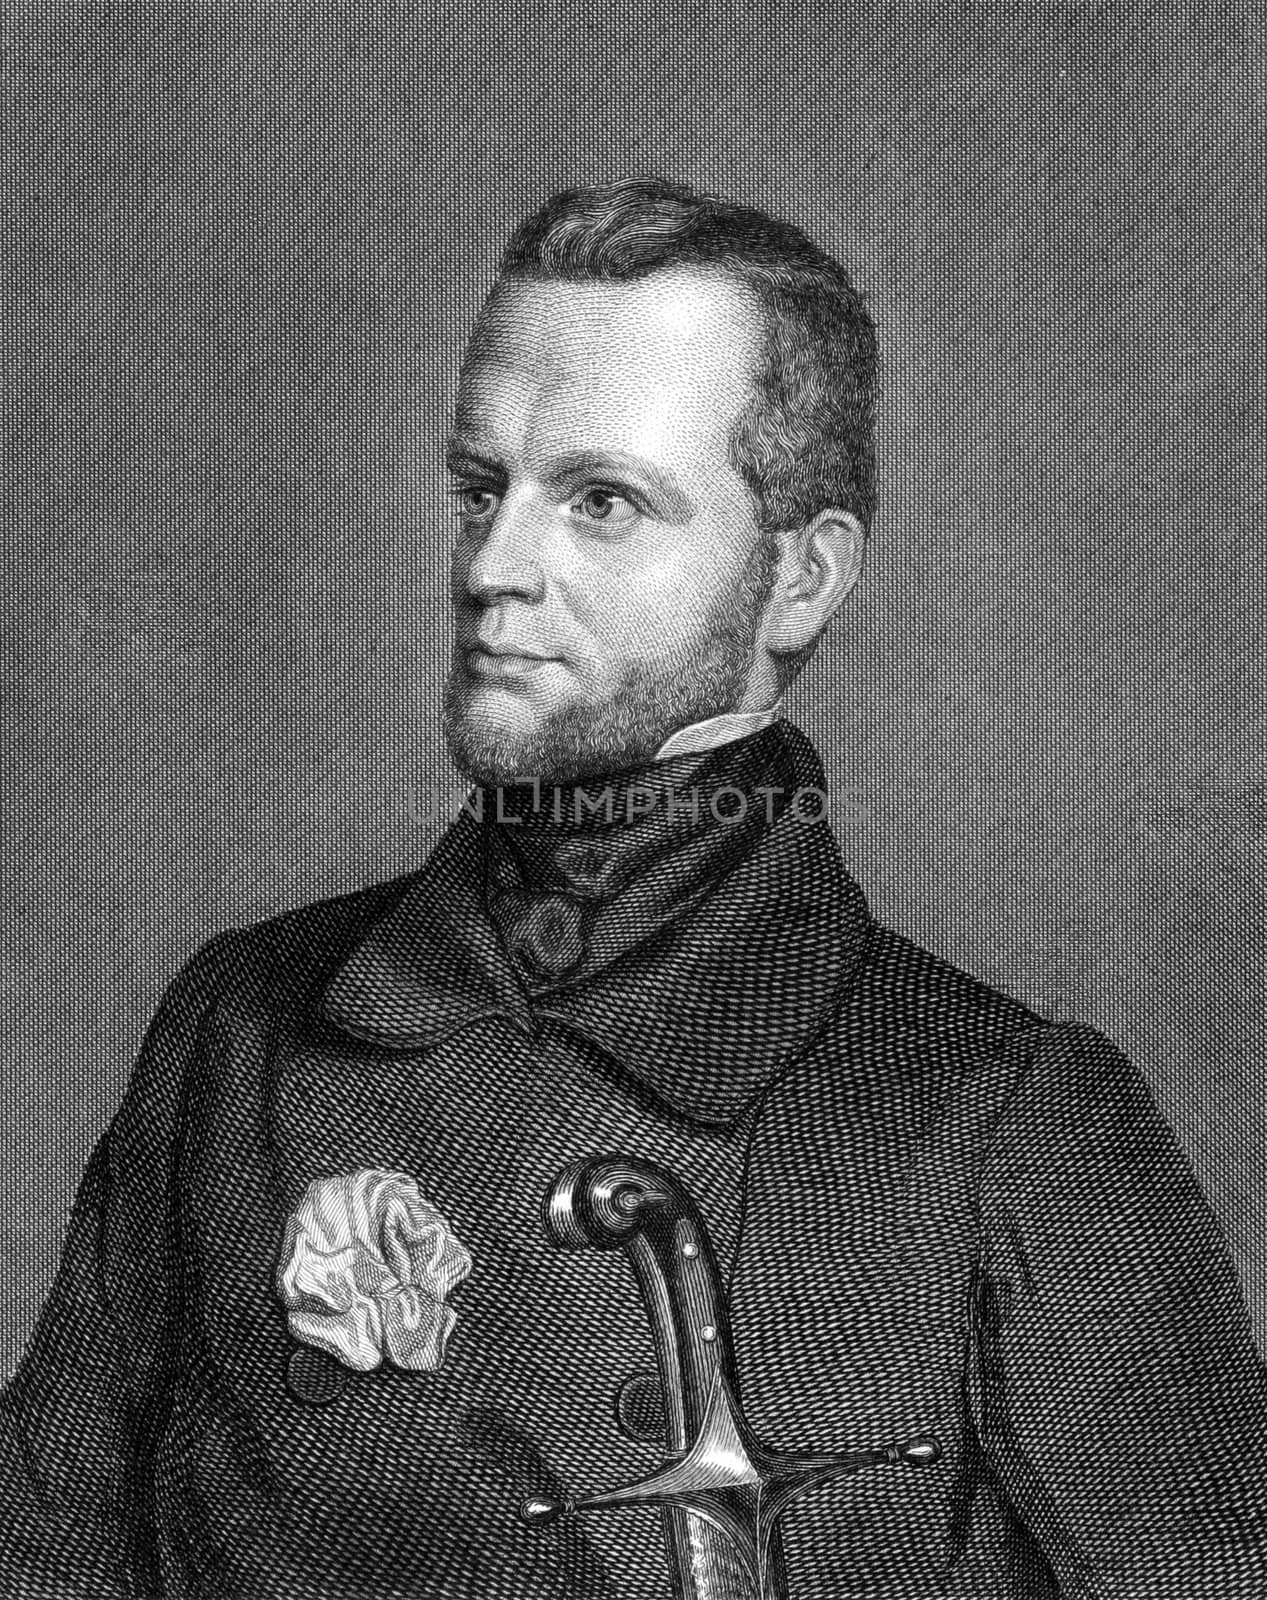 Carl Giskra (1820-1879) on engraving from 1859. Statesman of the Austrian Empire. Engraved by C.Raab and published in Meyers Konversations-Lexikon, Germany,1859.